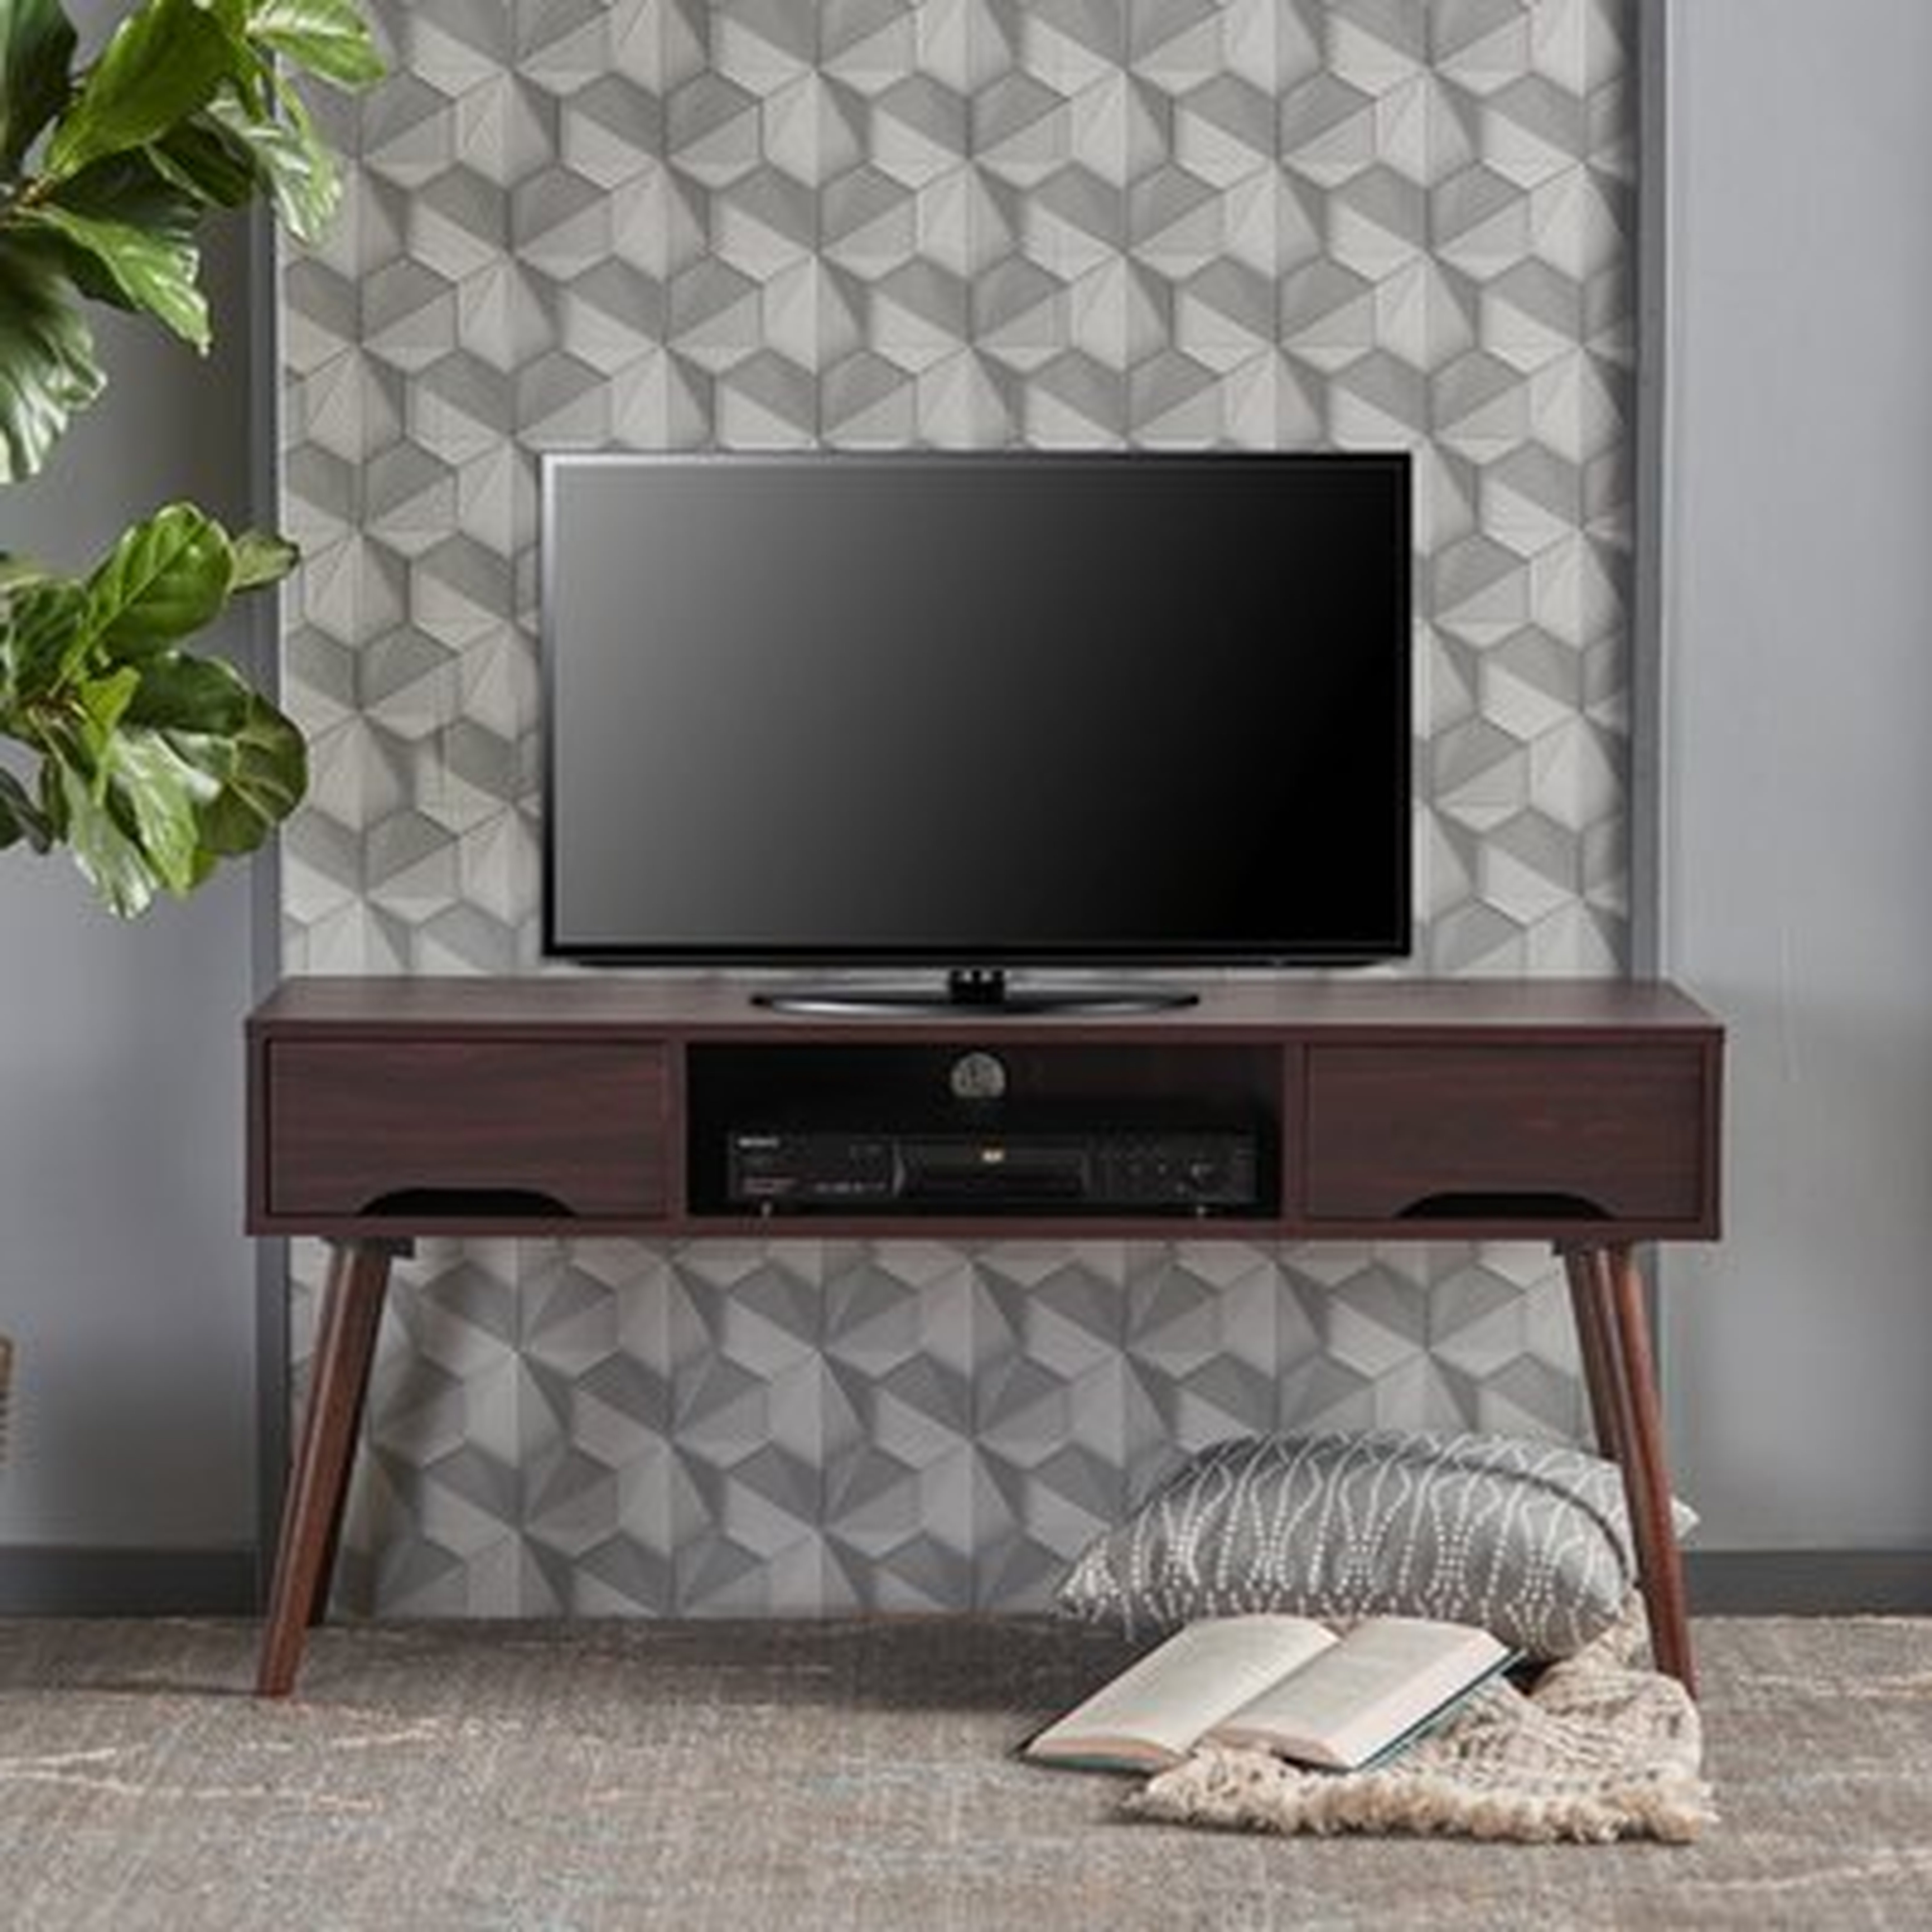 Verdi TV Stand for TVs up to 50 inches - AllModern